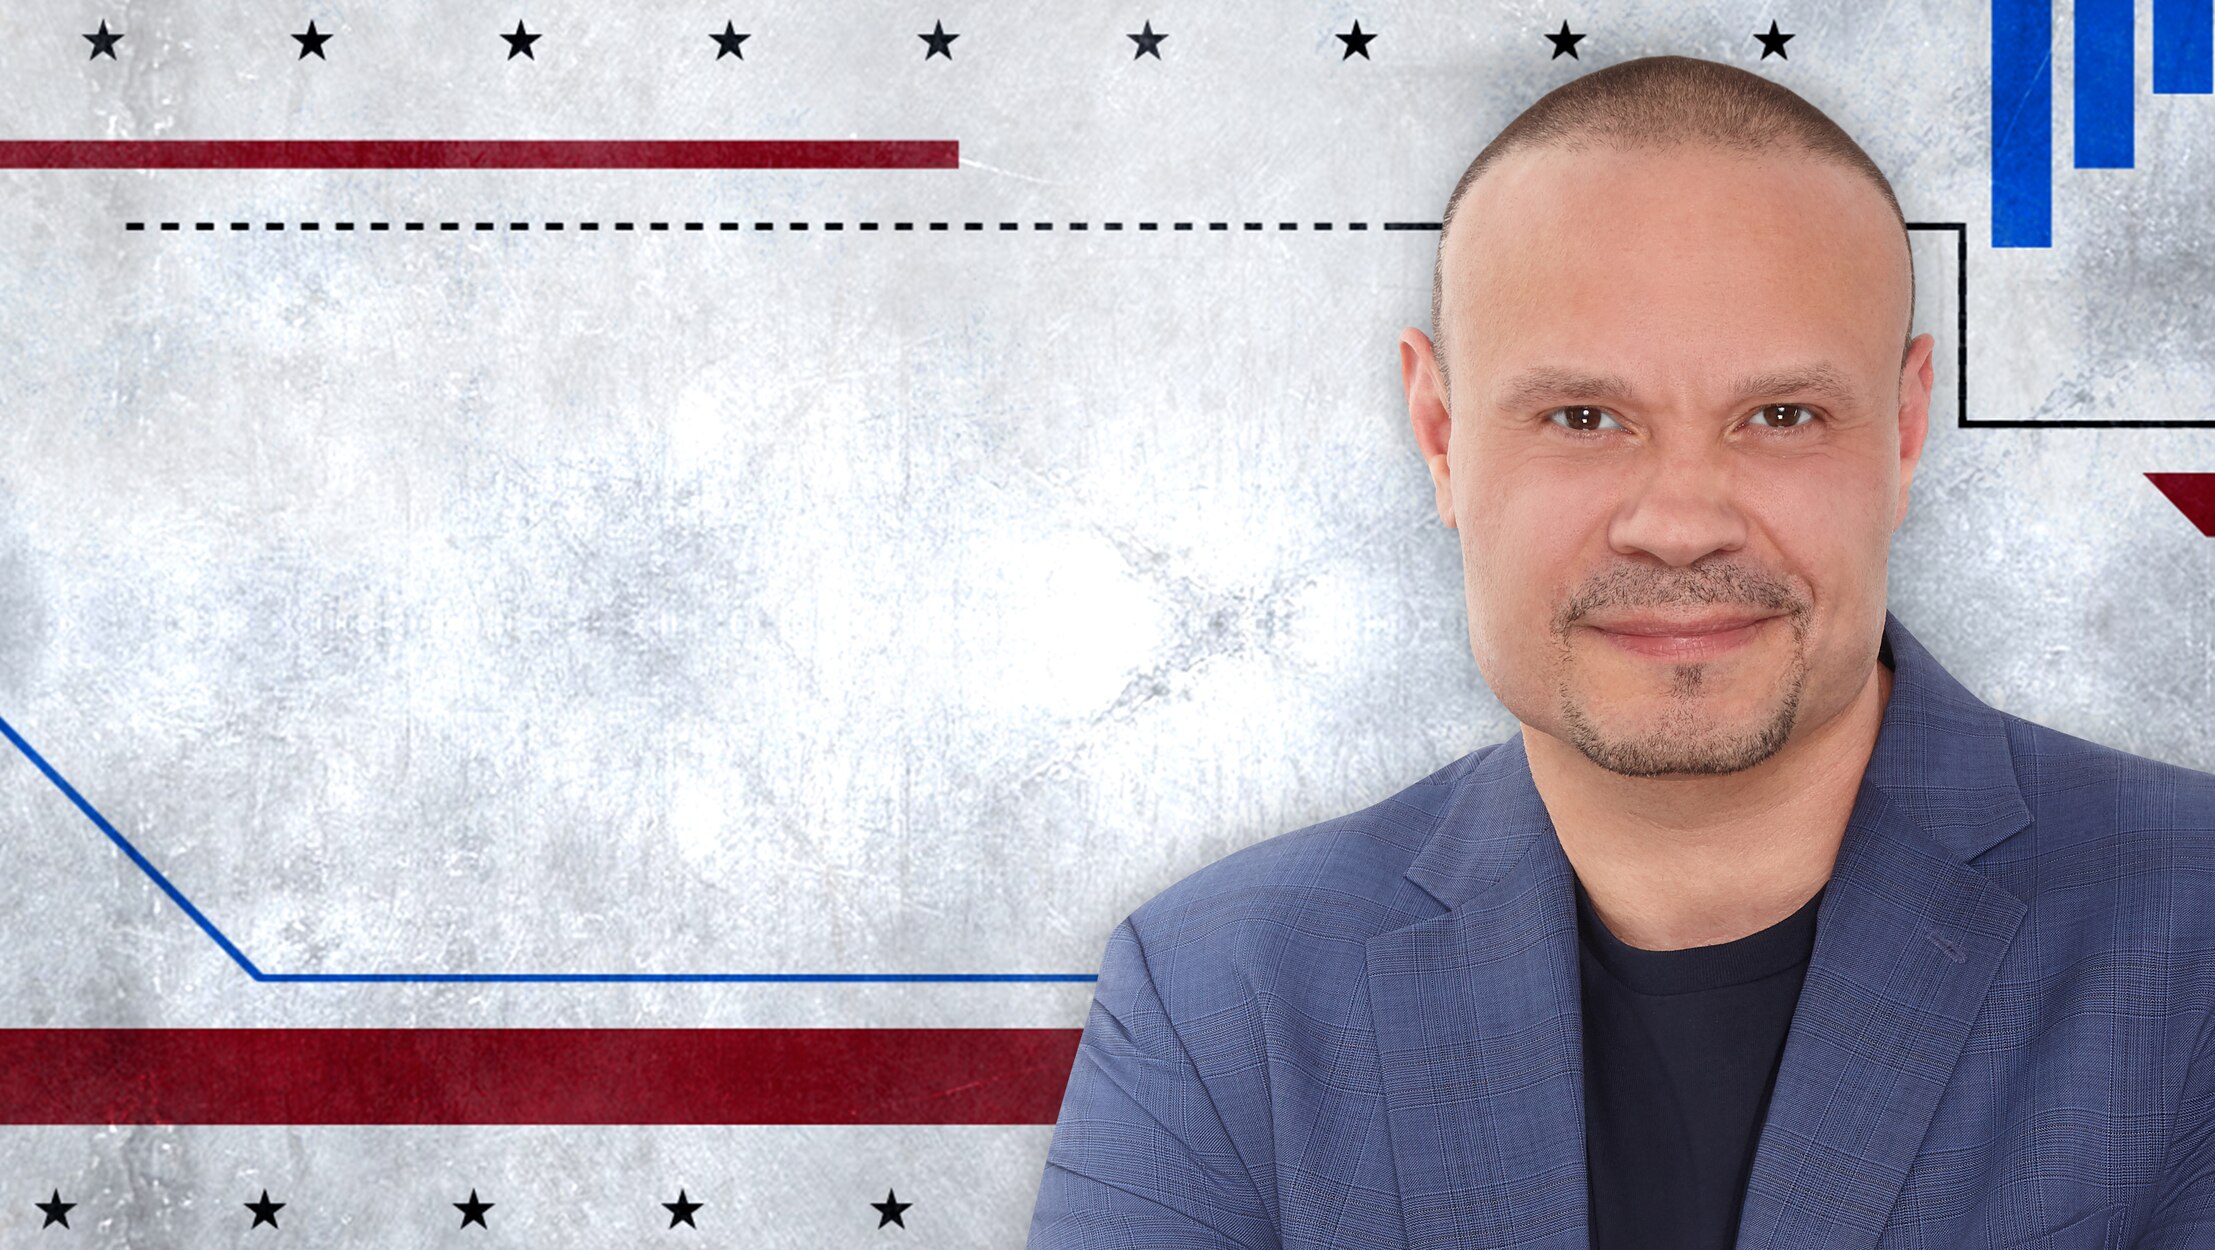 Will host Dan Bongino lose his net worth after the vaccine scandal